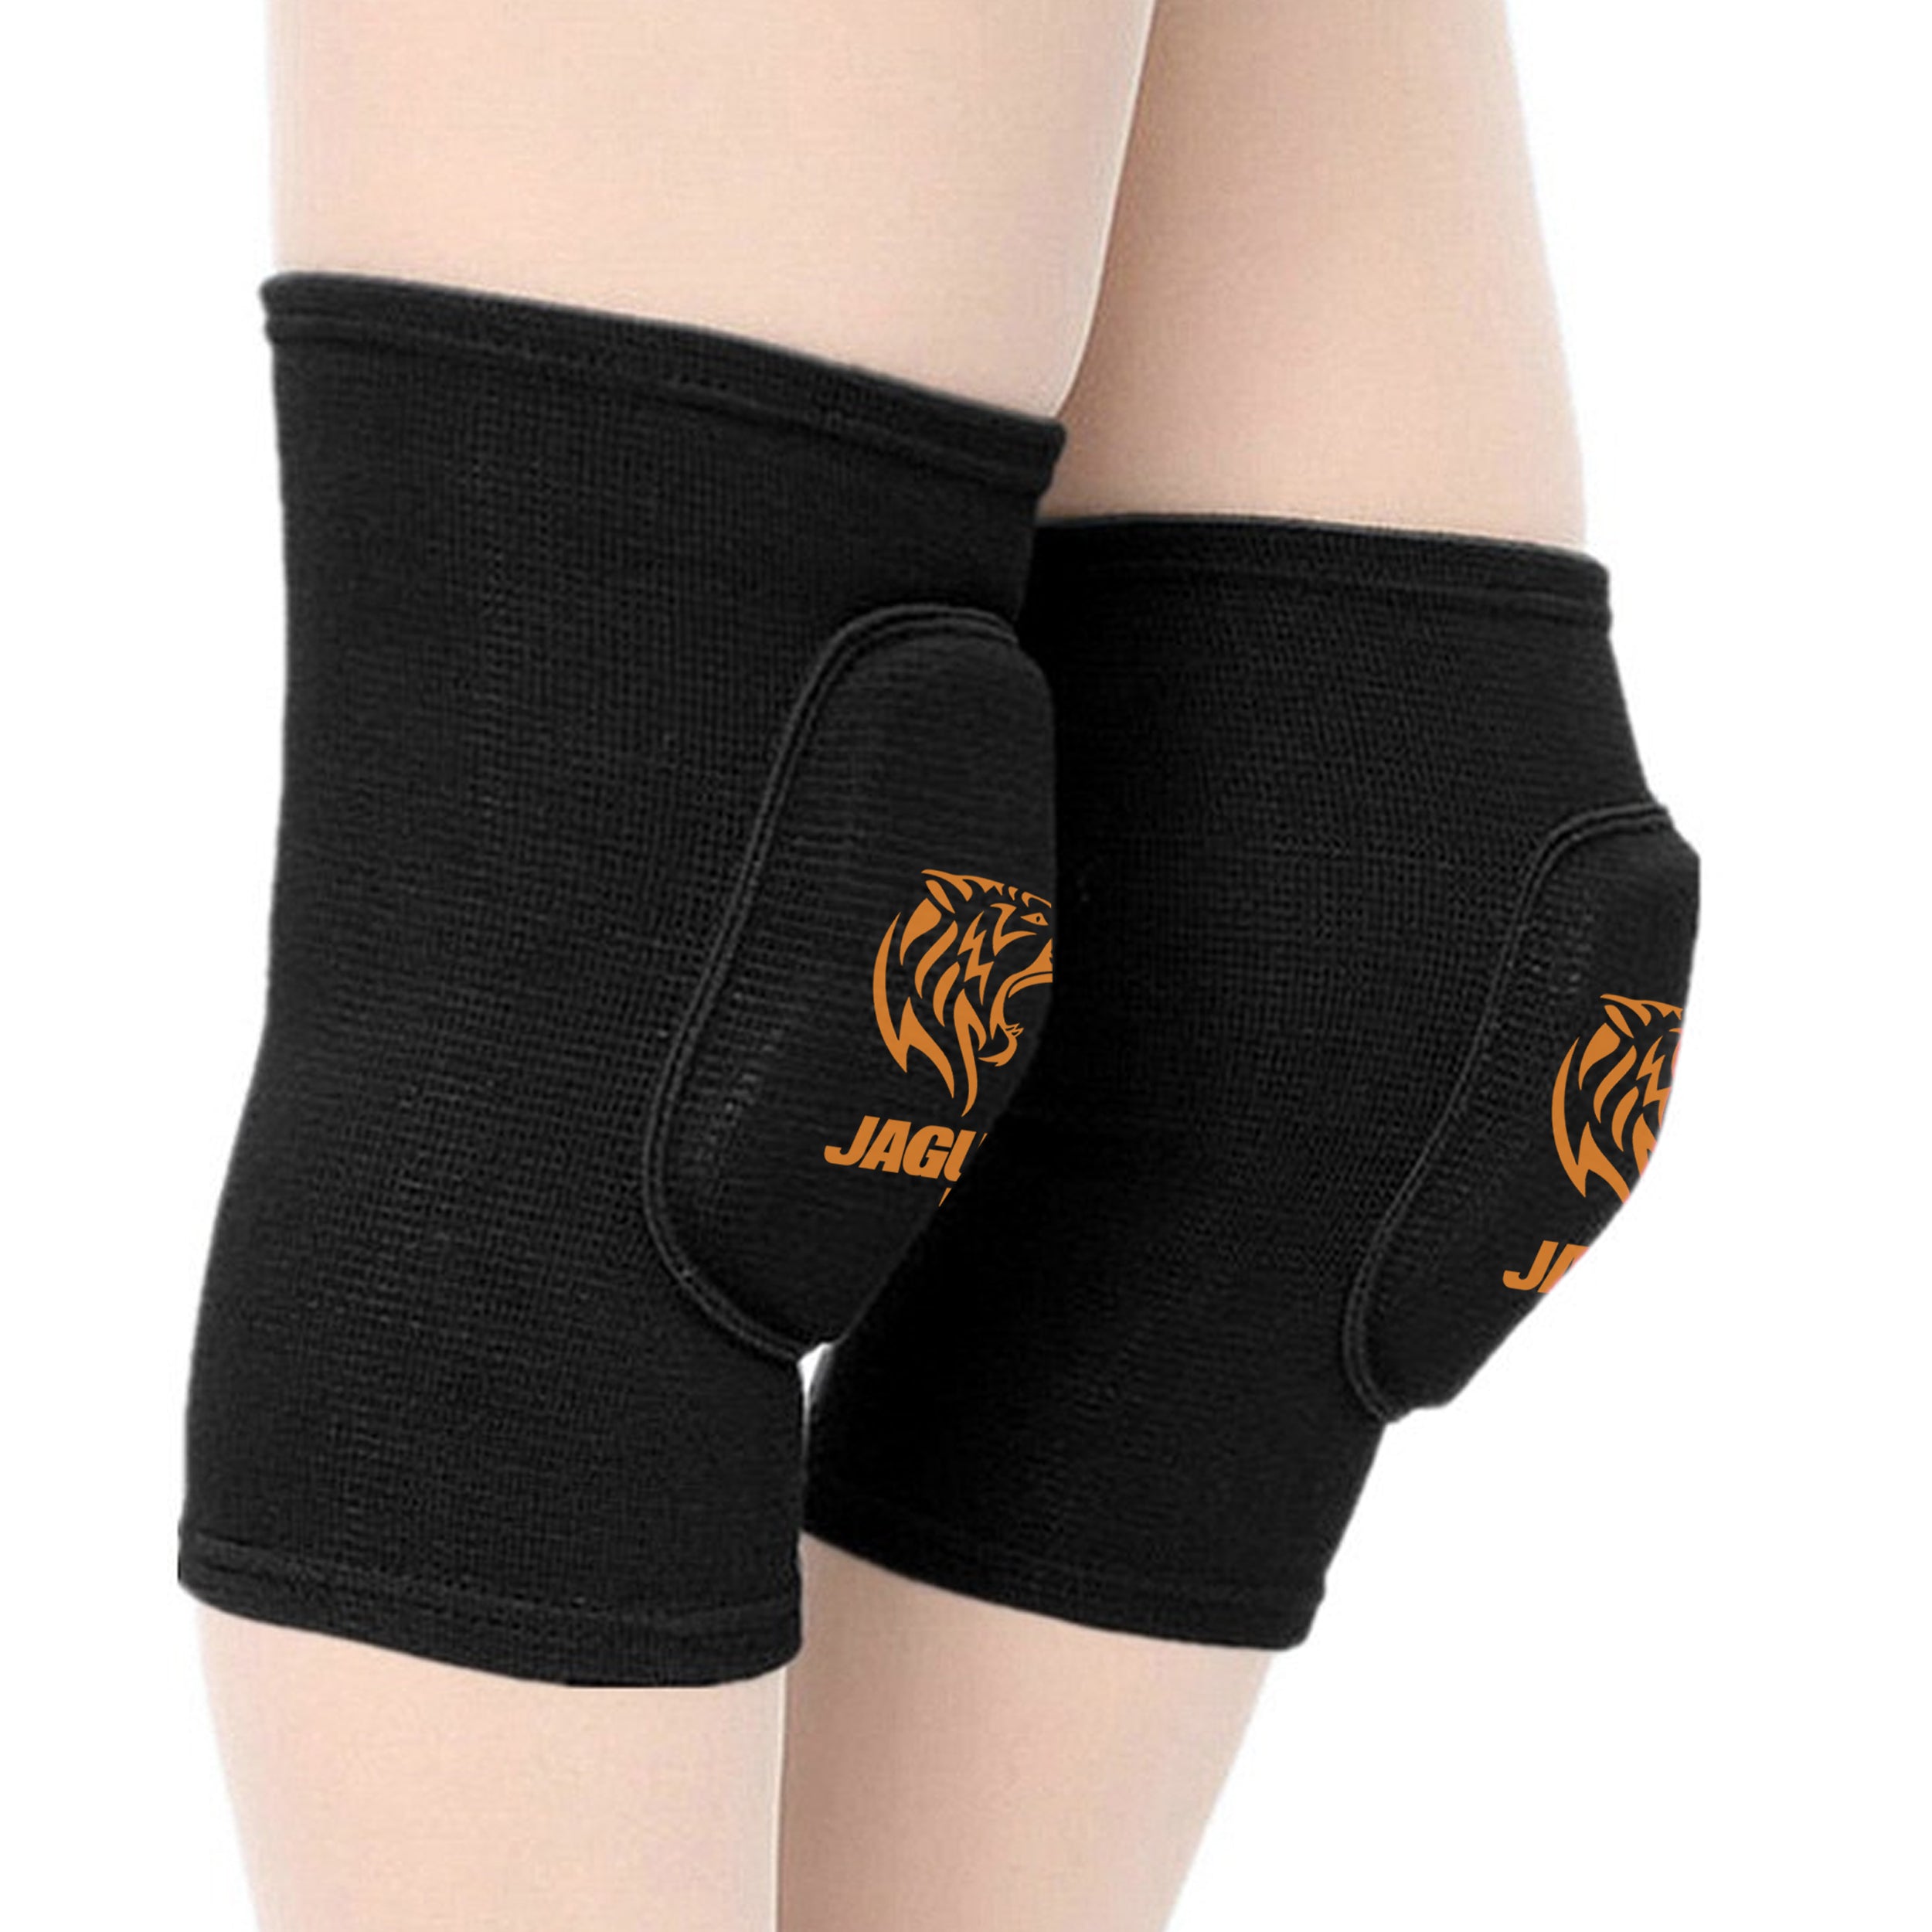 Jaguar Pro Gear - Midnight Knee Pad Pair For Boxing MMA Muay Thai And